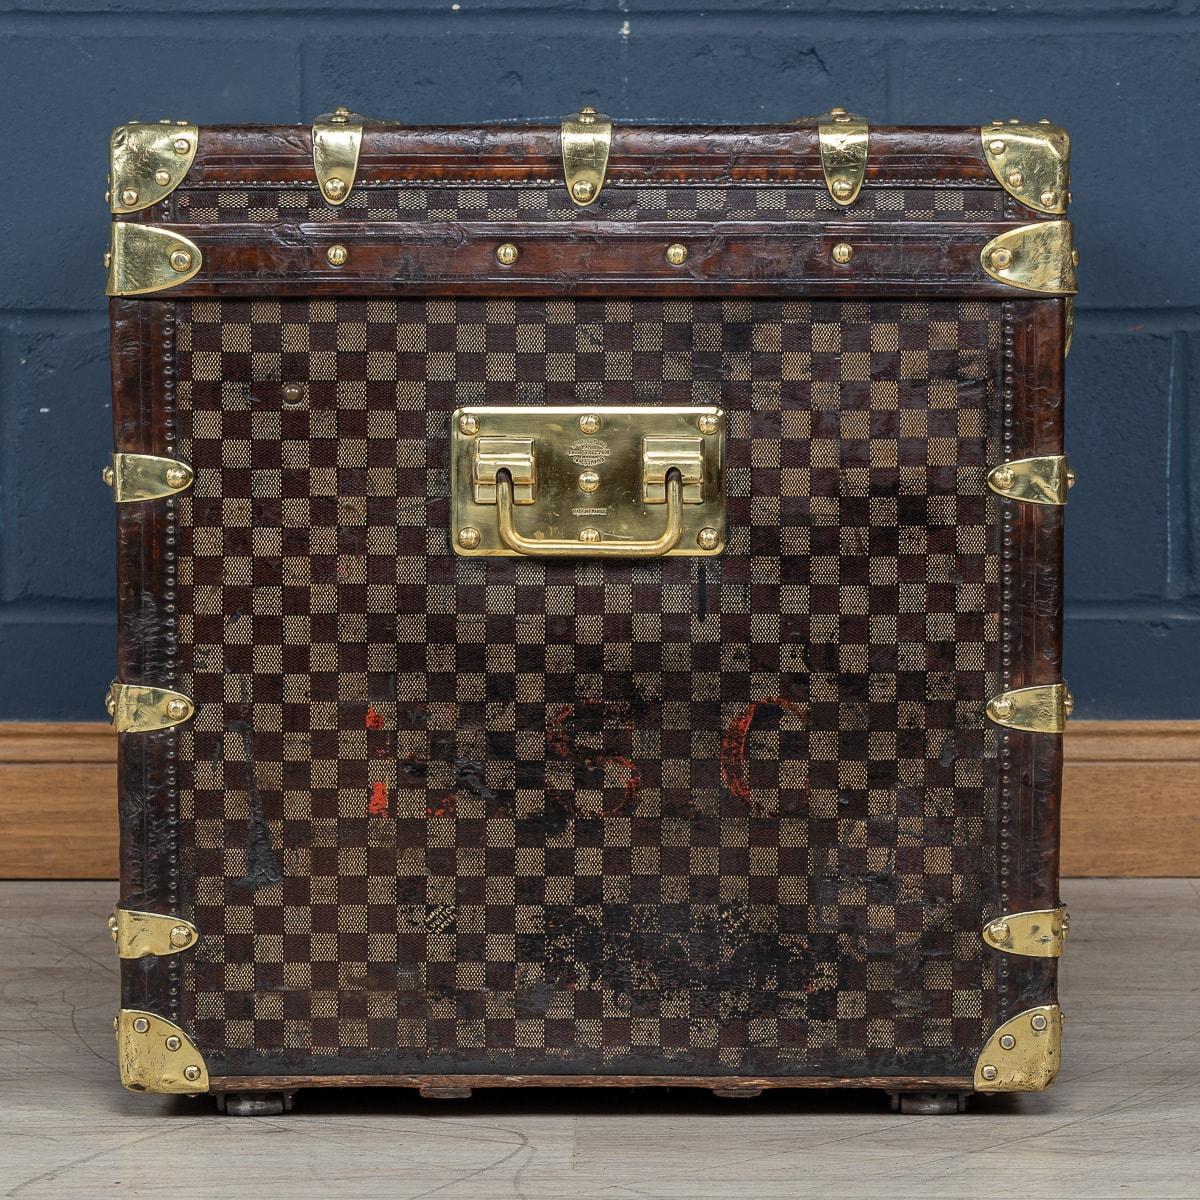 Antique 20th Century Louis Vuitton Courier Trunk In Damier Canvas, France c.1900 In Good Condition For Sale In Royal Tunbridge Wells, Kent